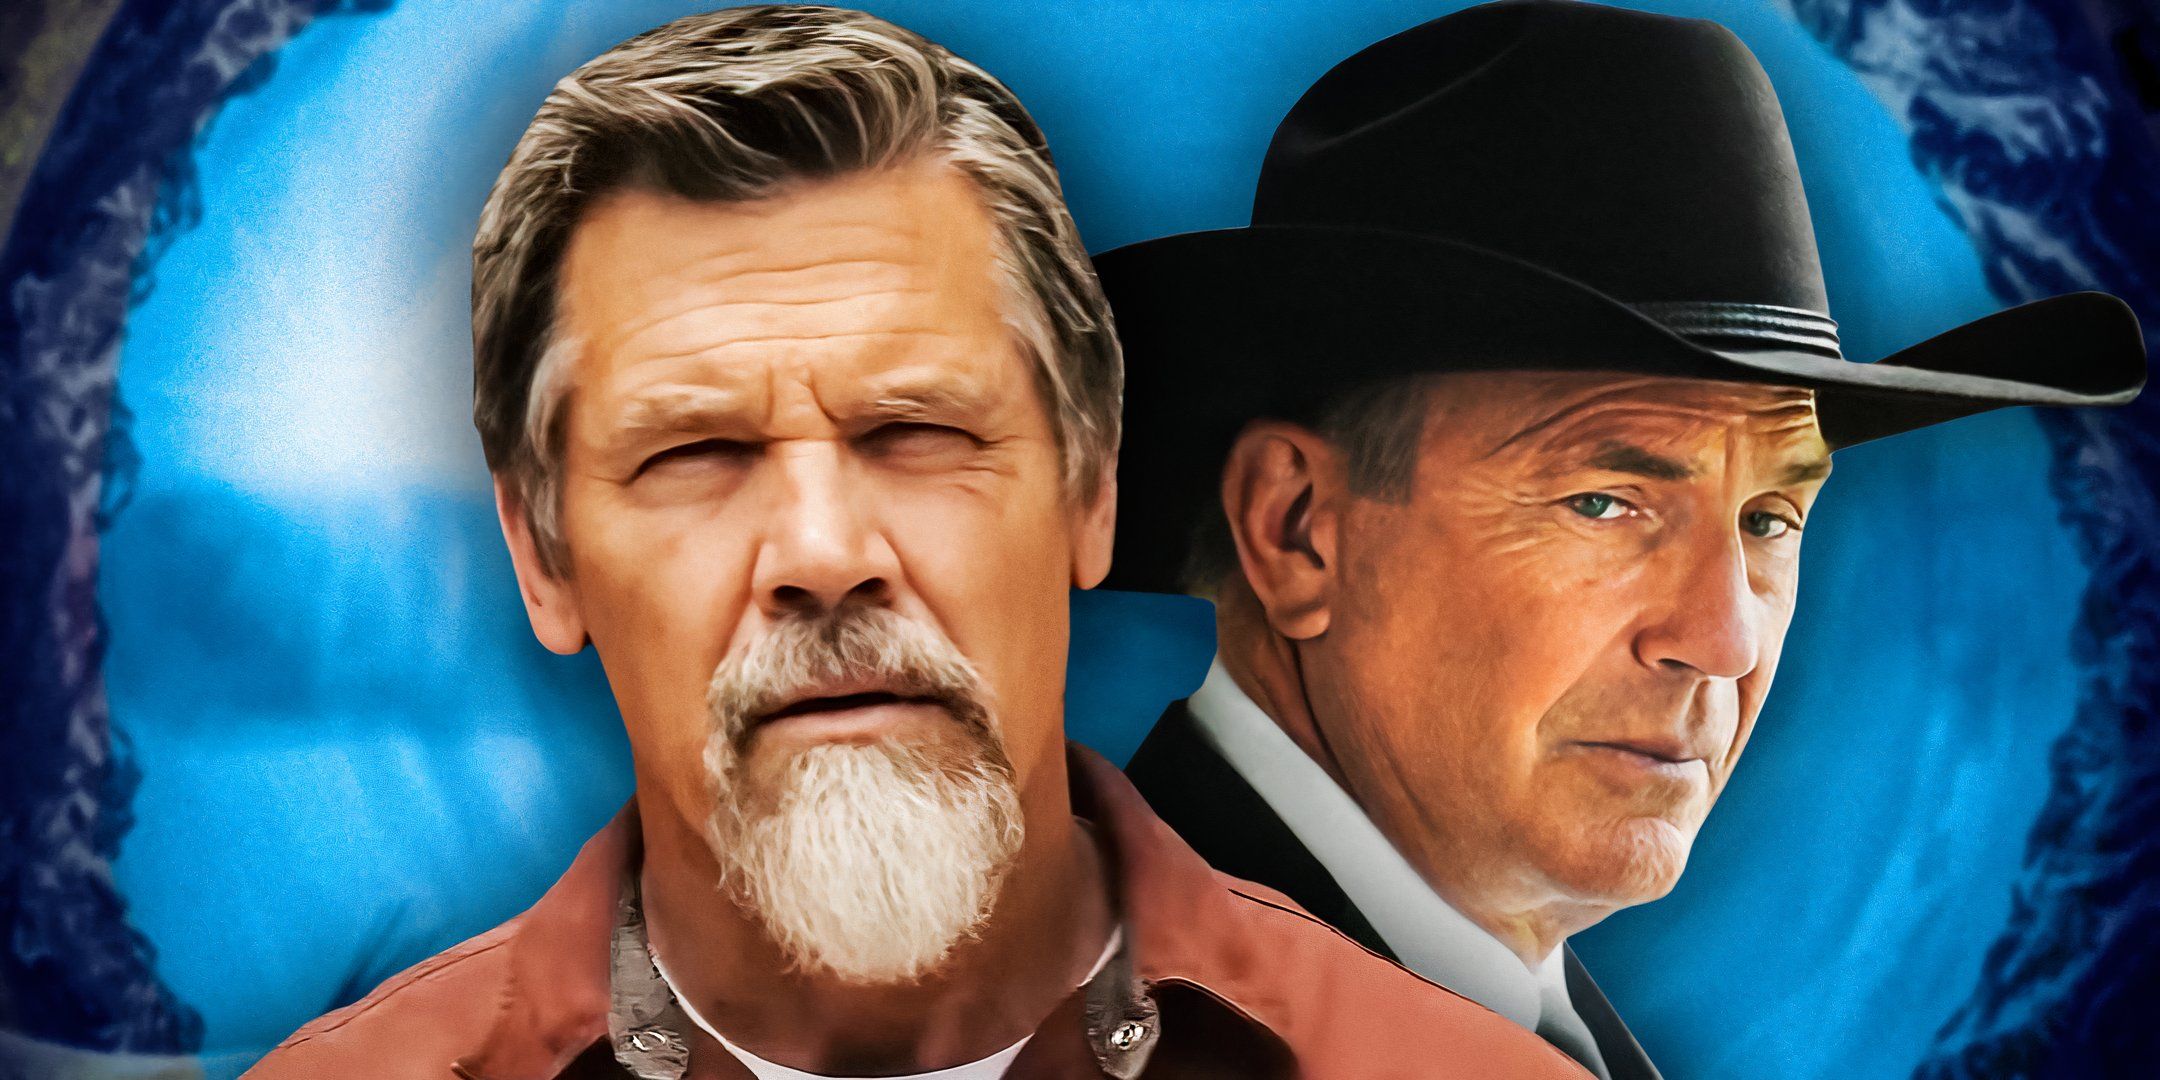 (Josh-Brolin-and-(Kevin-Costner-as-John-Dutton)-from-Yellowstone